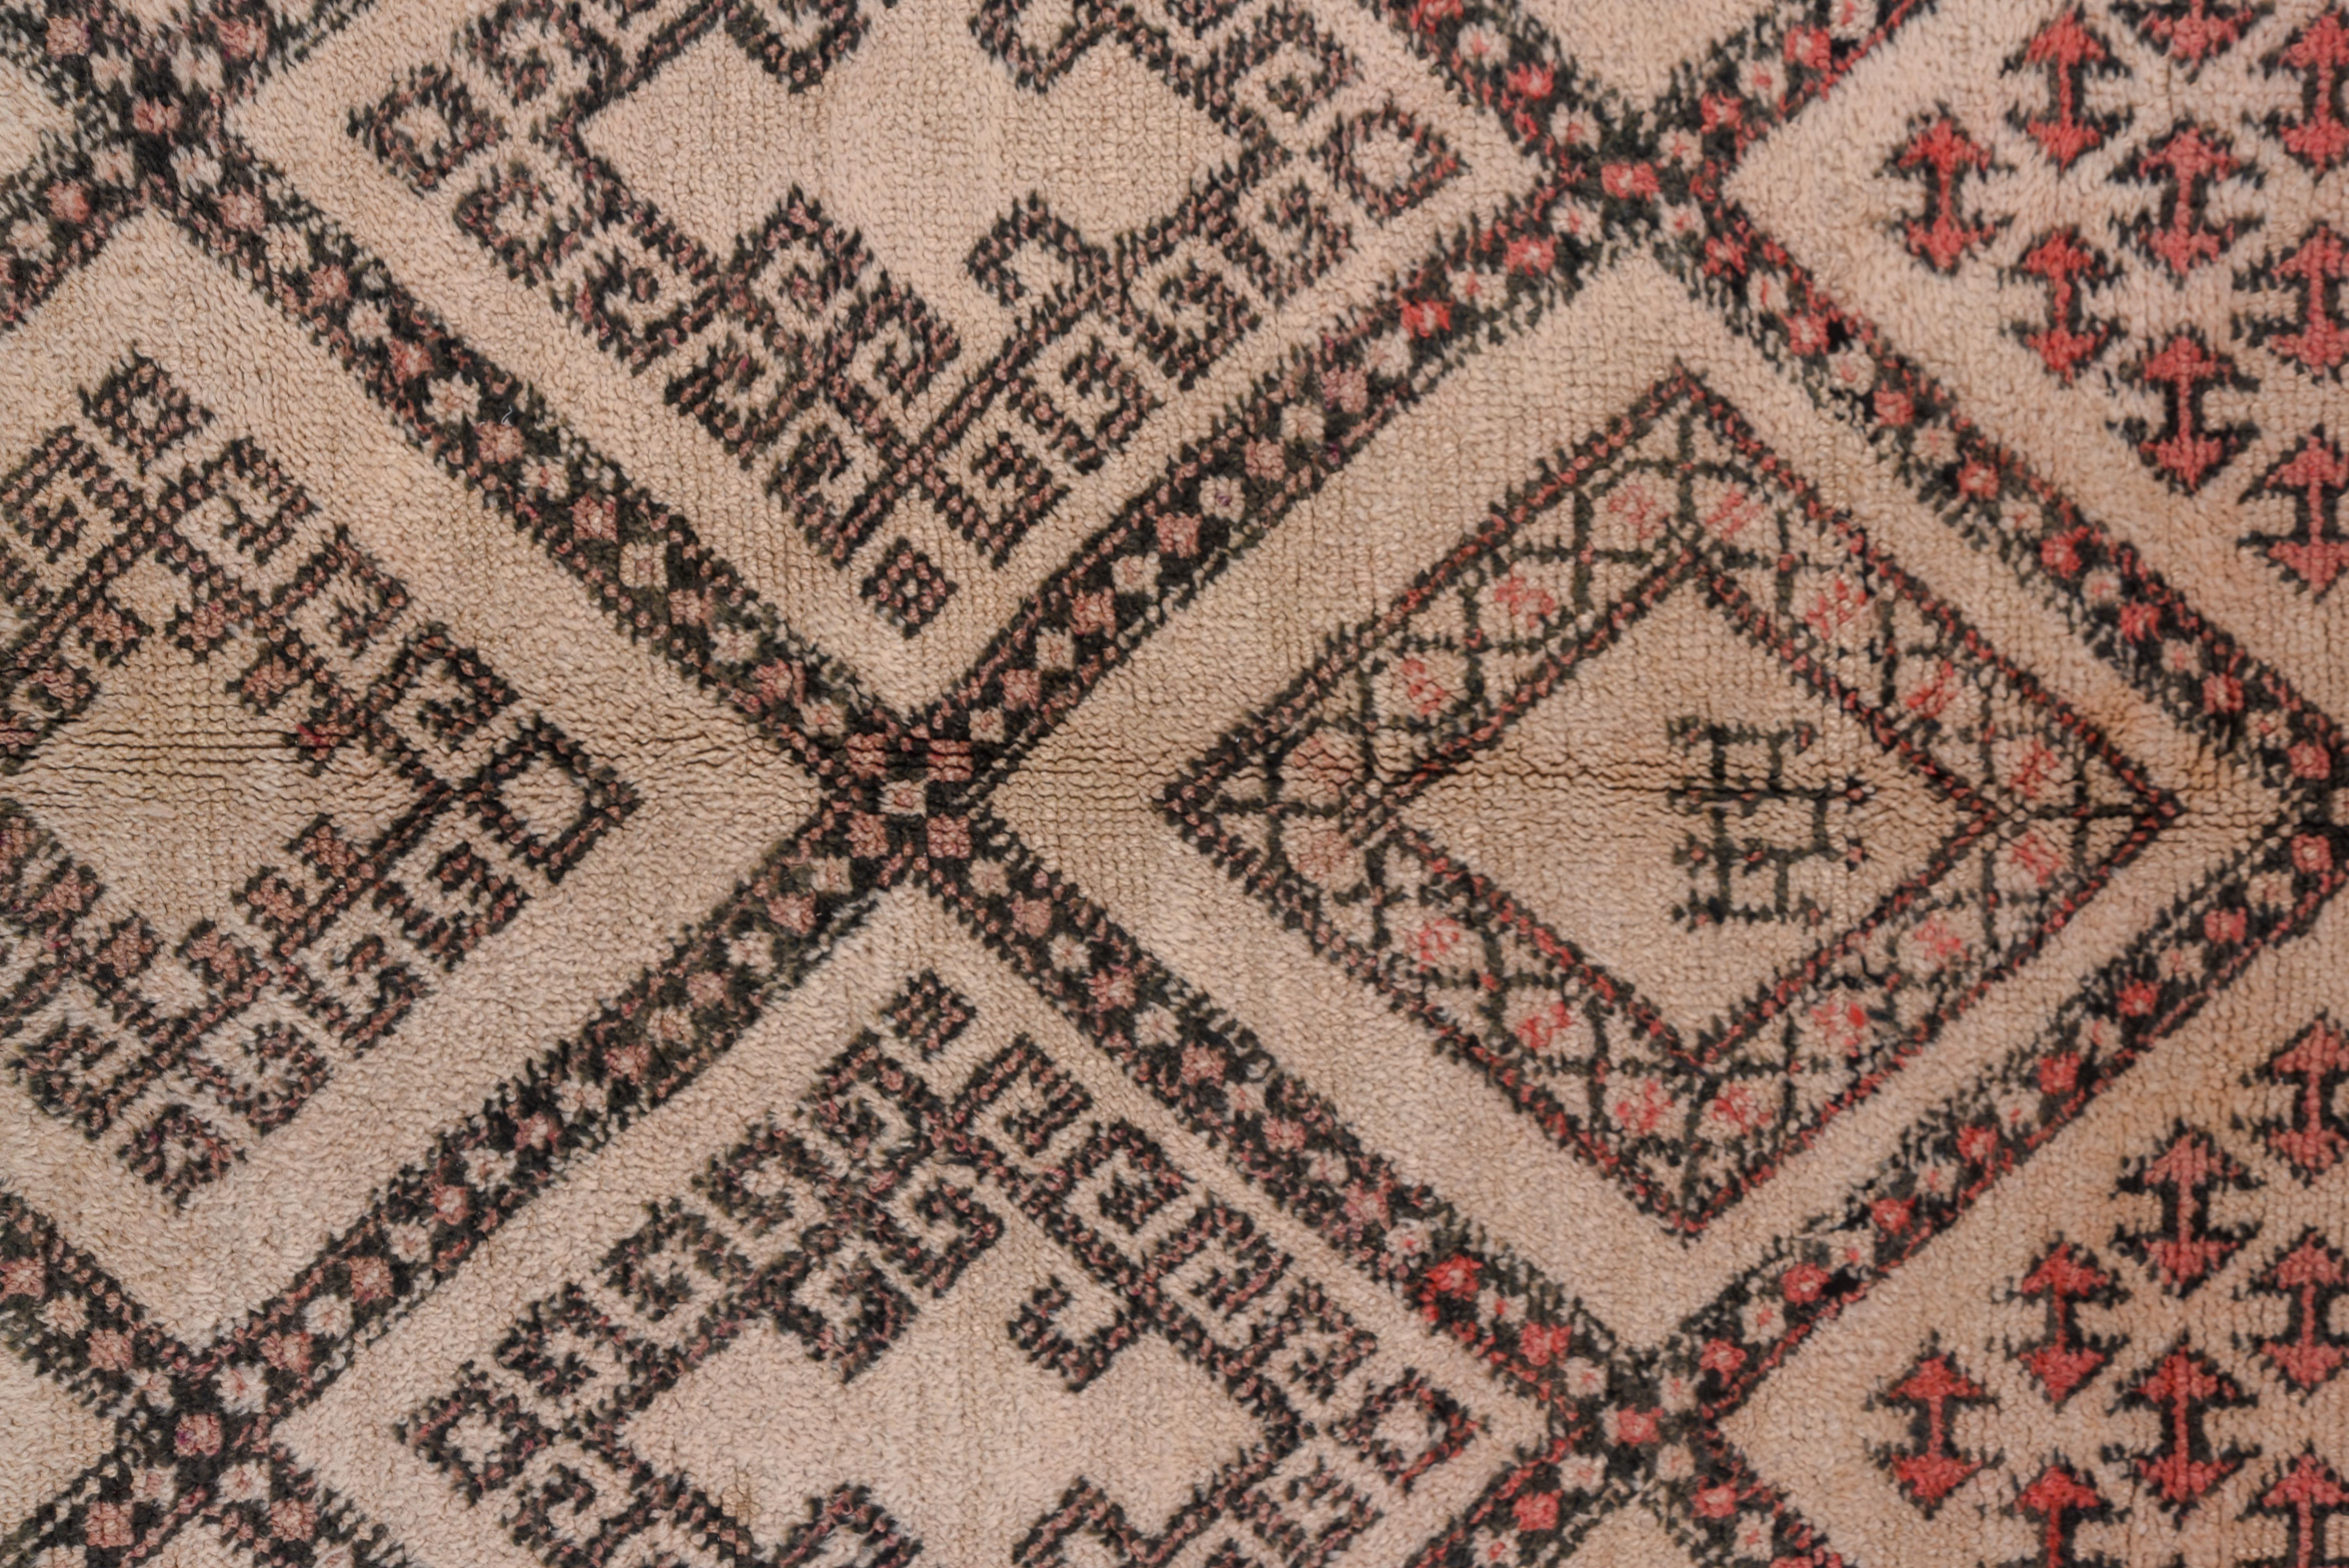 Moroccan Tribal Geometric Rug with Diamonds and Inner Detailing Across Field For Sale 1